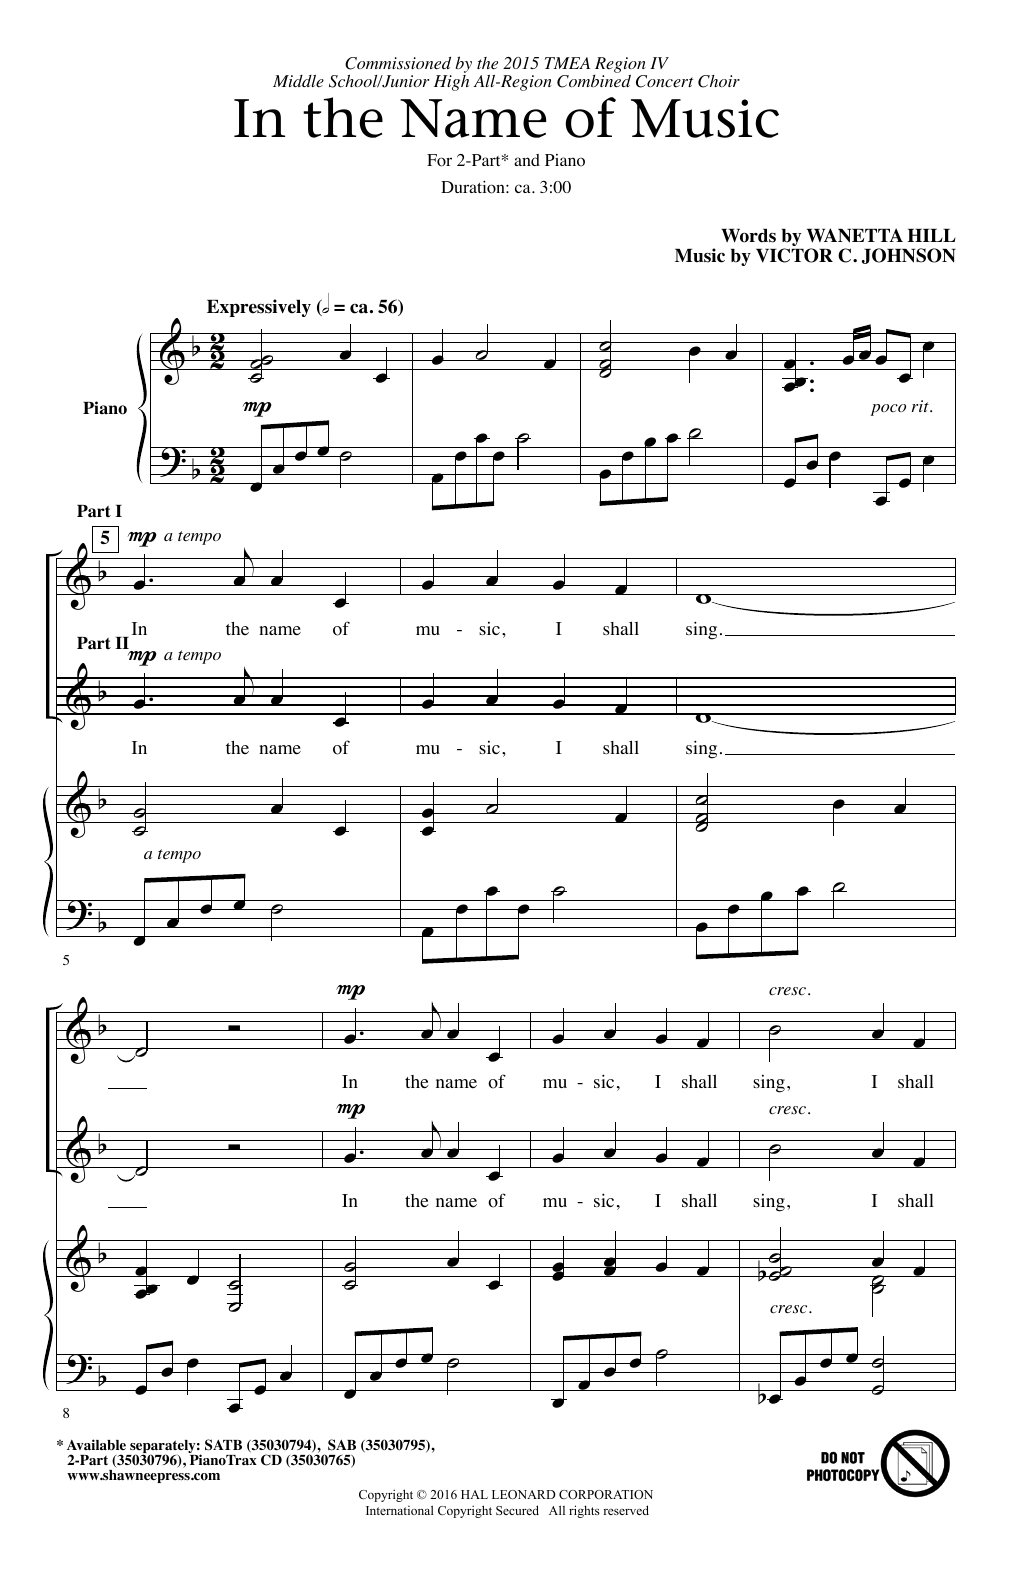 Download Victor C. Johnson In The Name Of Music Sheet Music